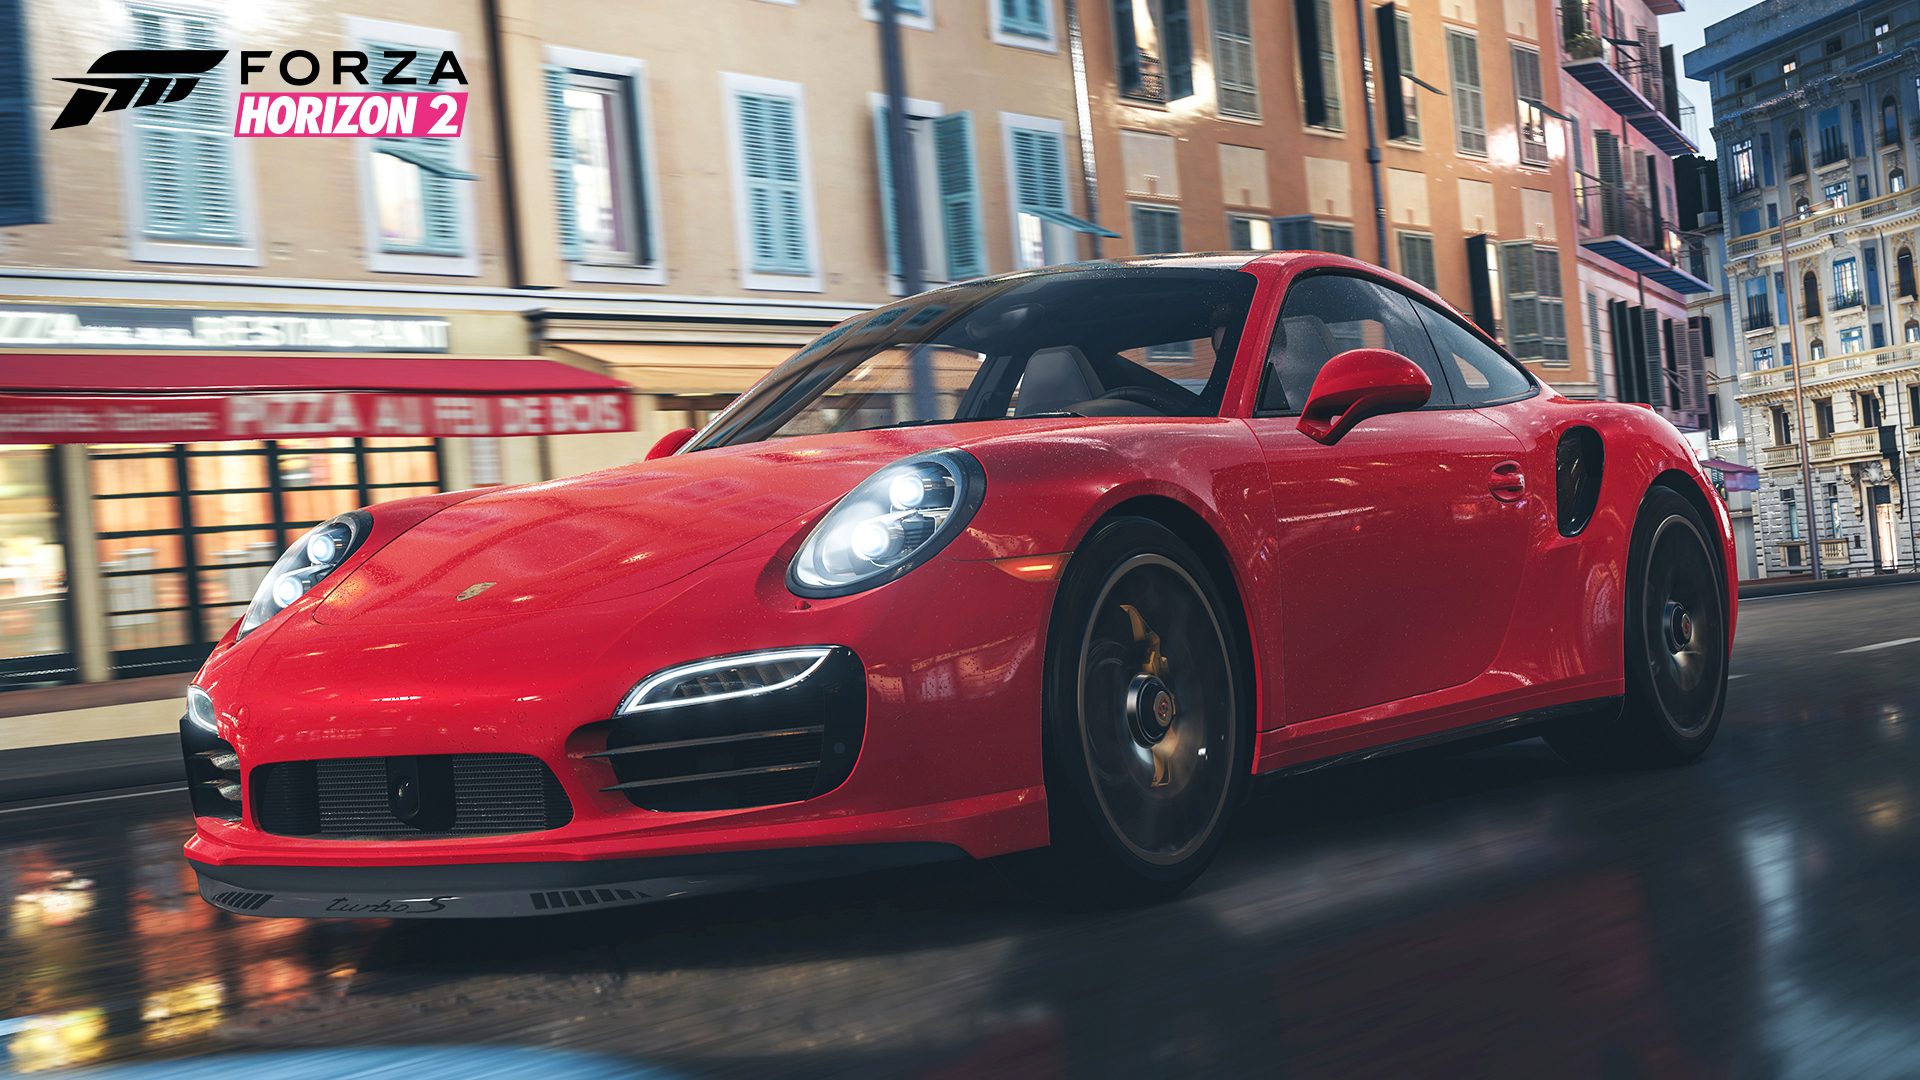 Porsche Returns To Forza Series In New Horizon 2 Expansion Pack Gtplanet